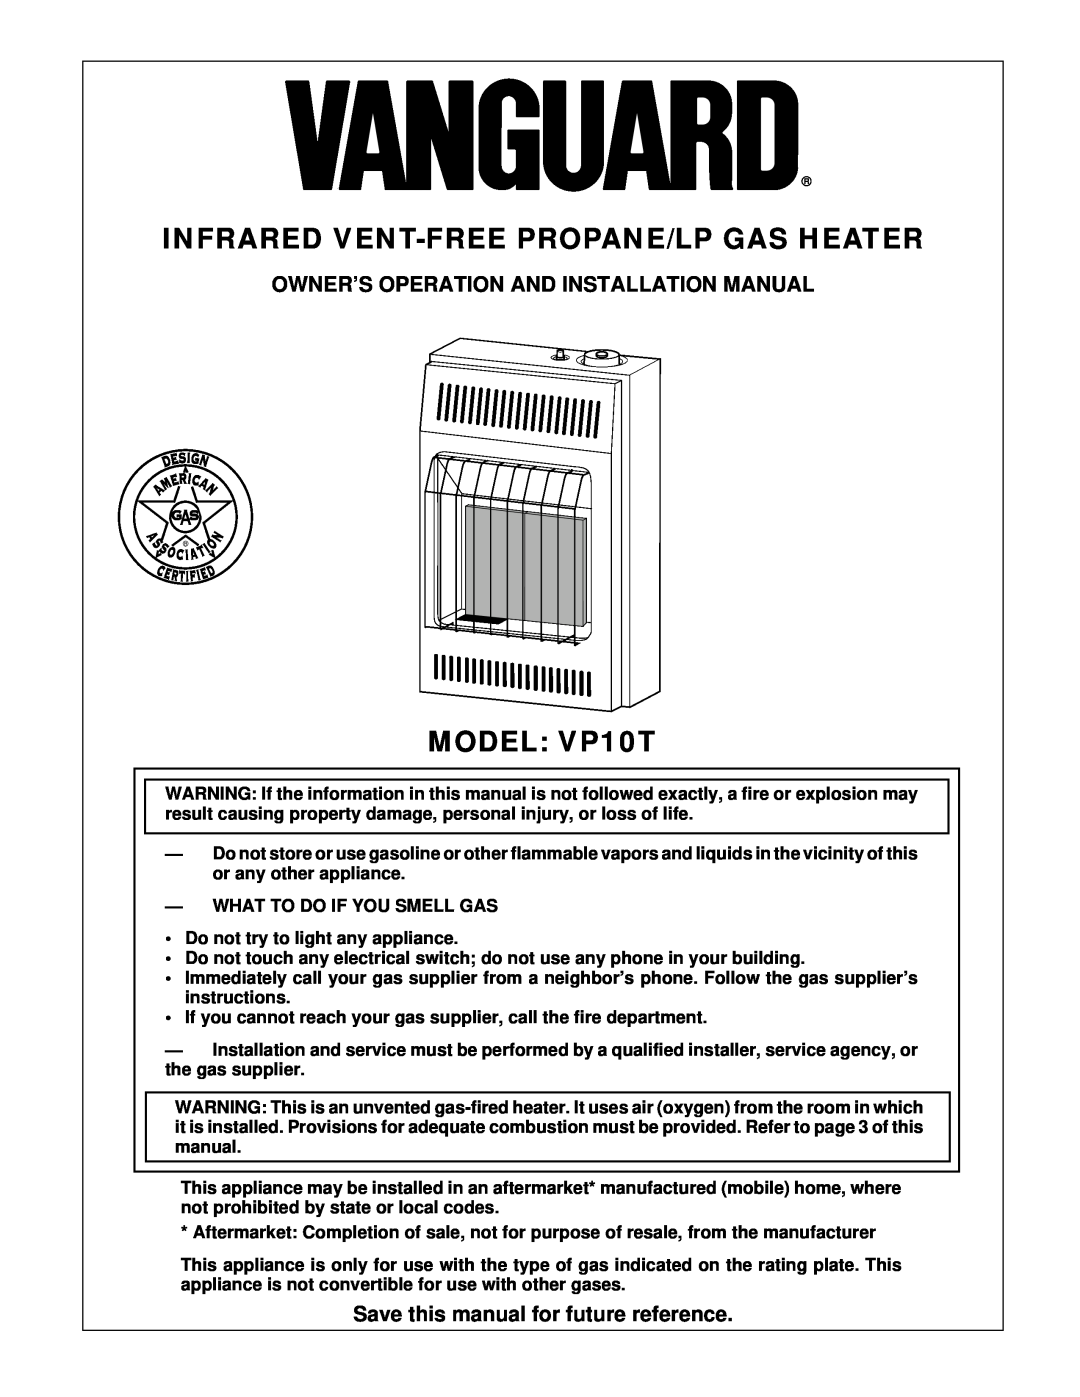 Desa installation manual Infrared Vent-Freepropane/Lp Gas Heater, MODEL VP10T, Save this manual for future reference 